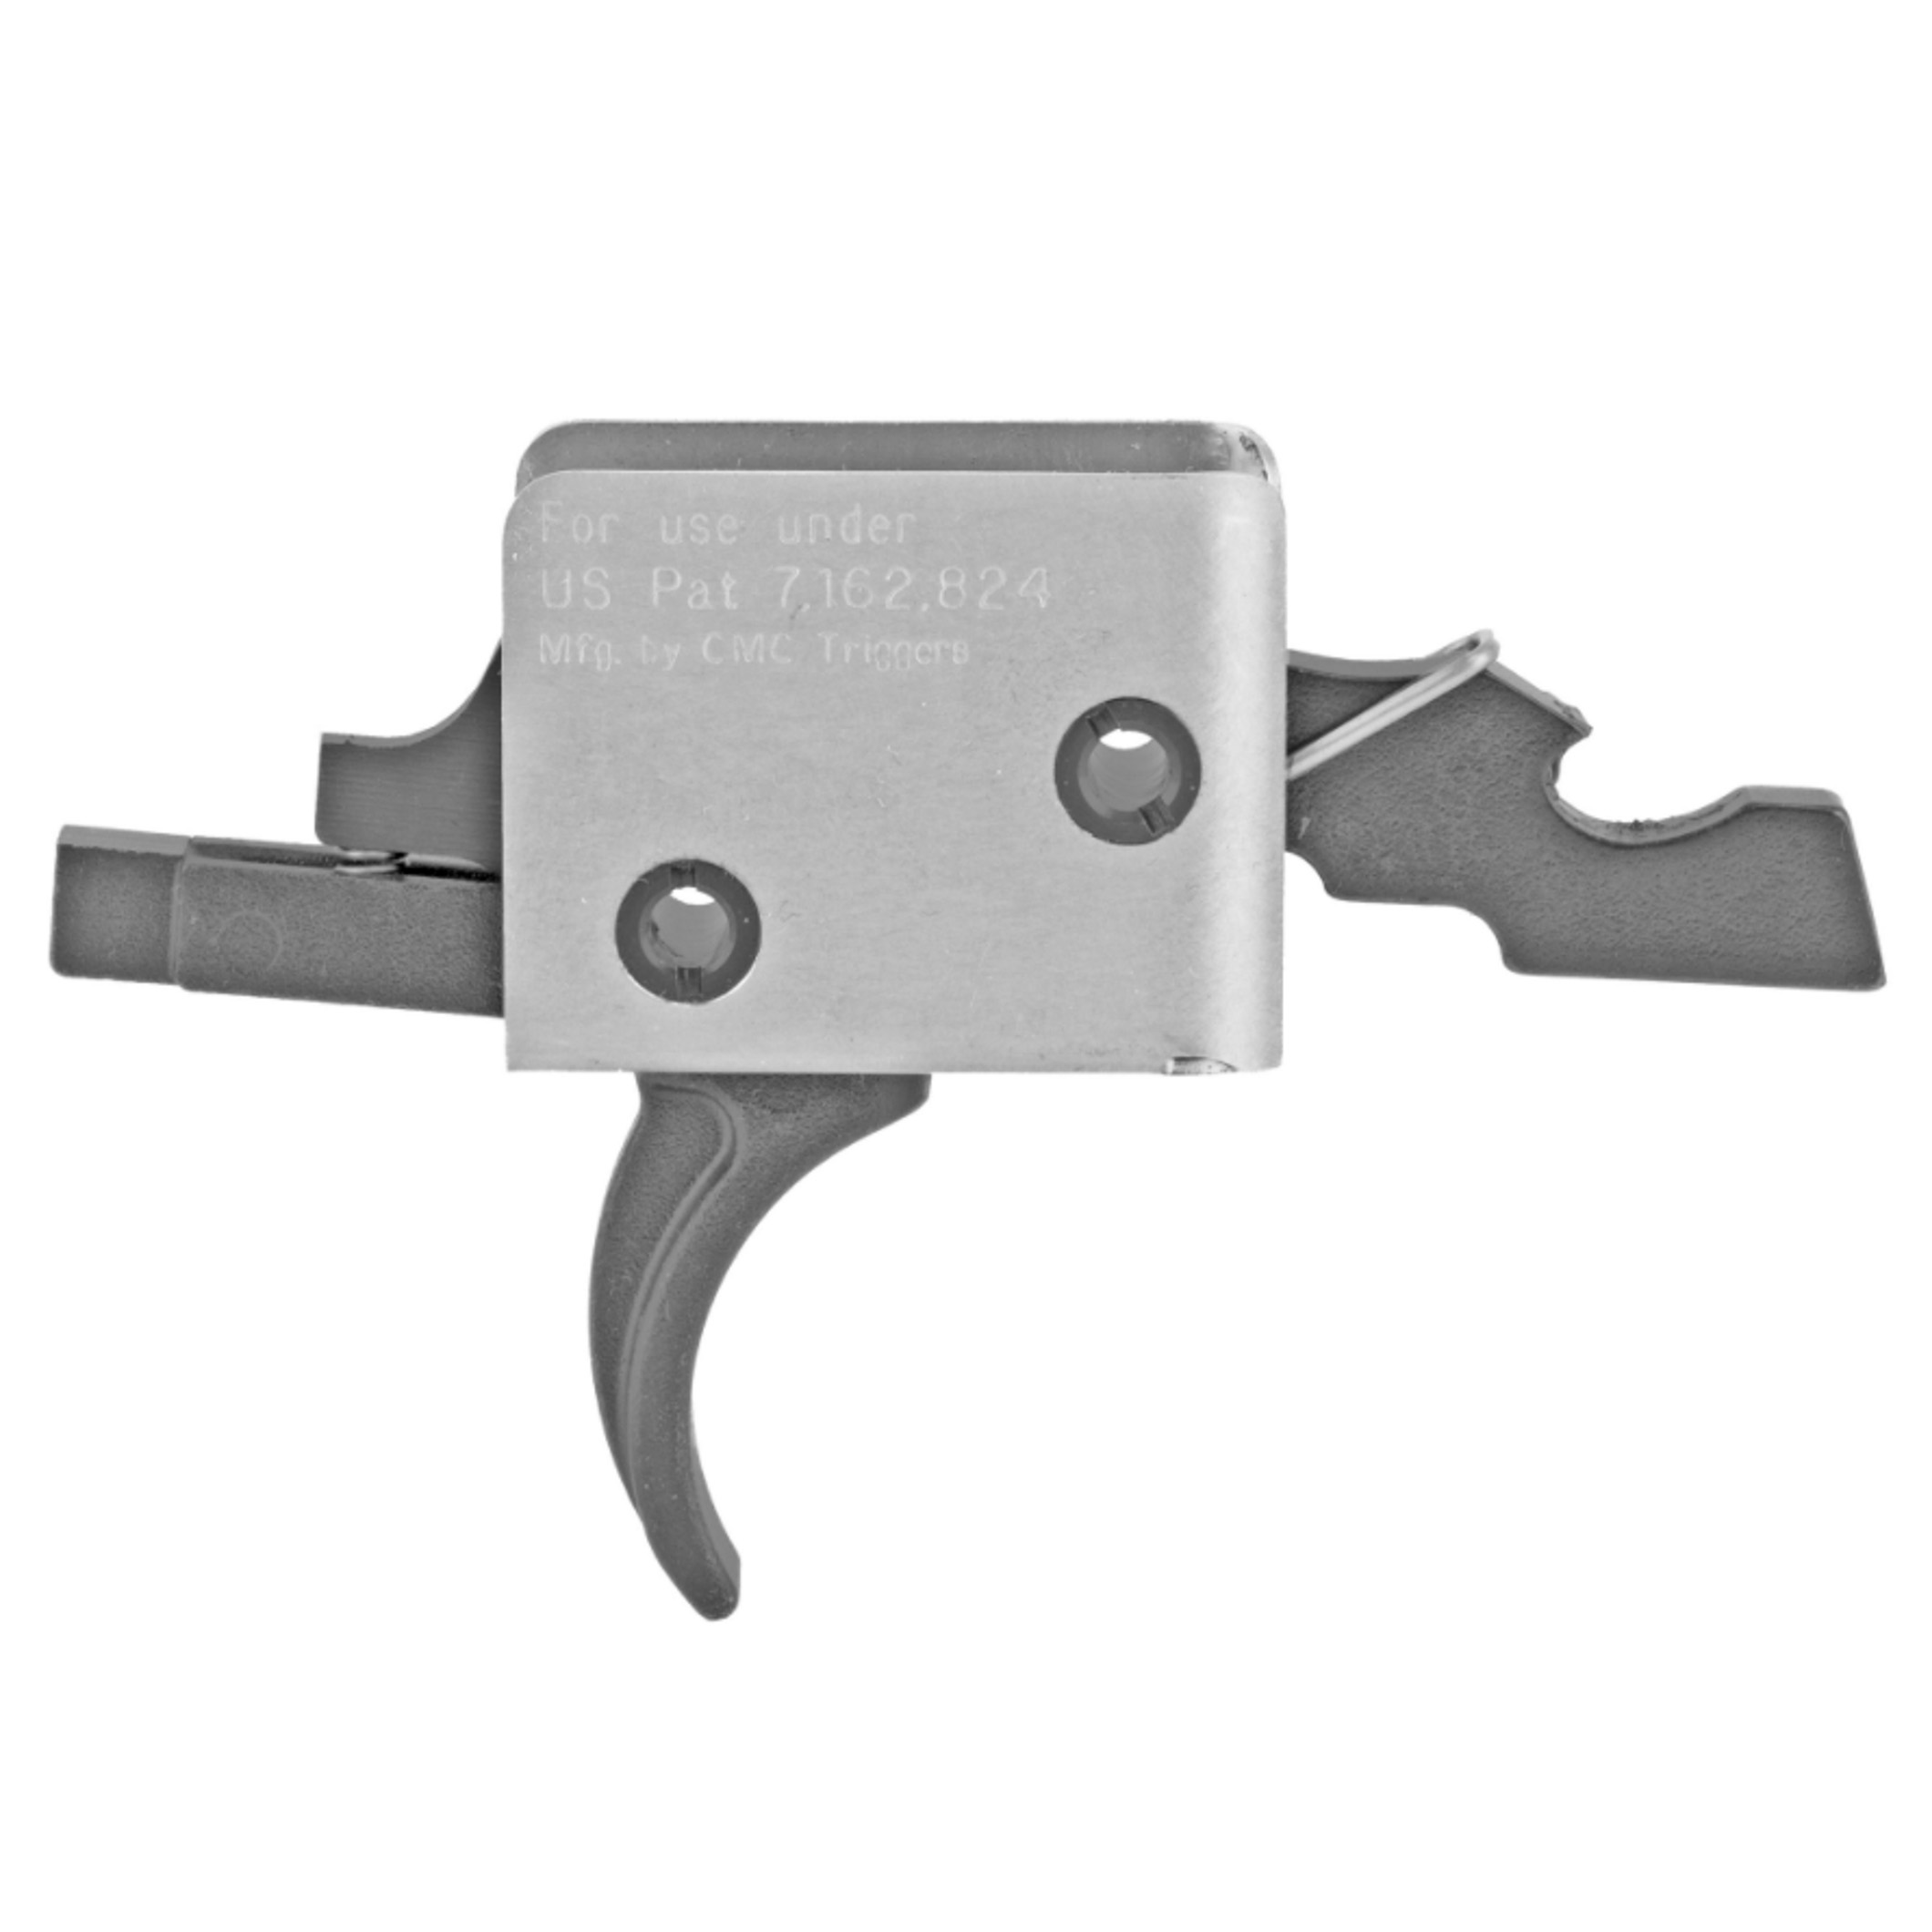 CMC Trigger Curved